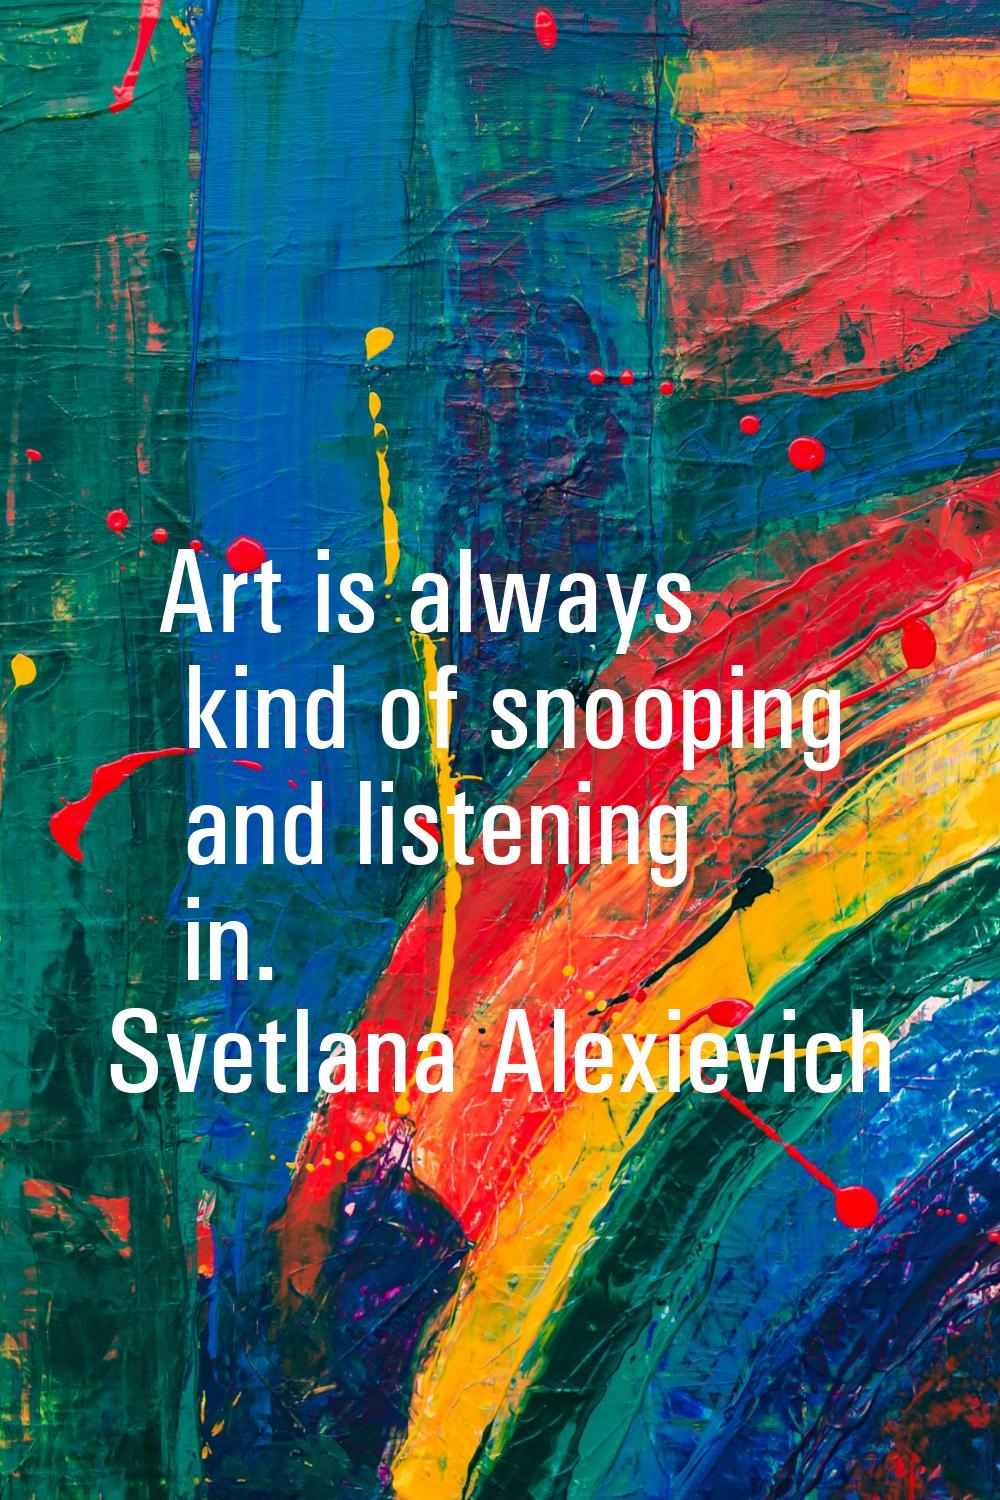 Art is always kind of snooping and listening in.